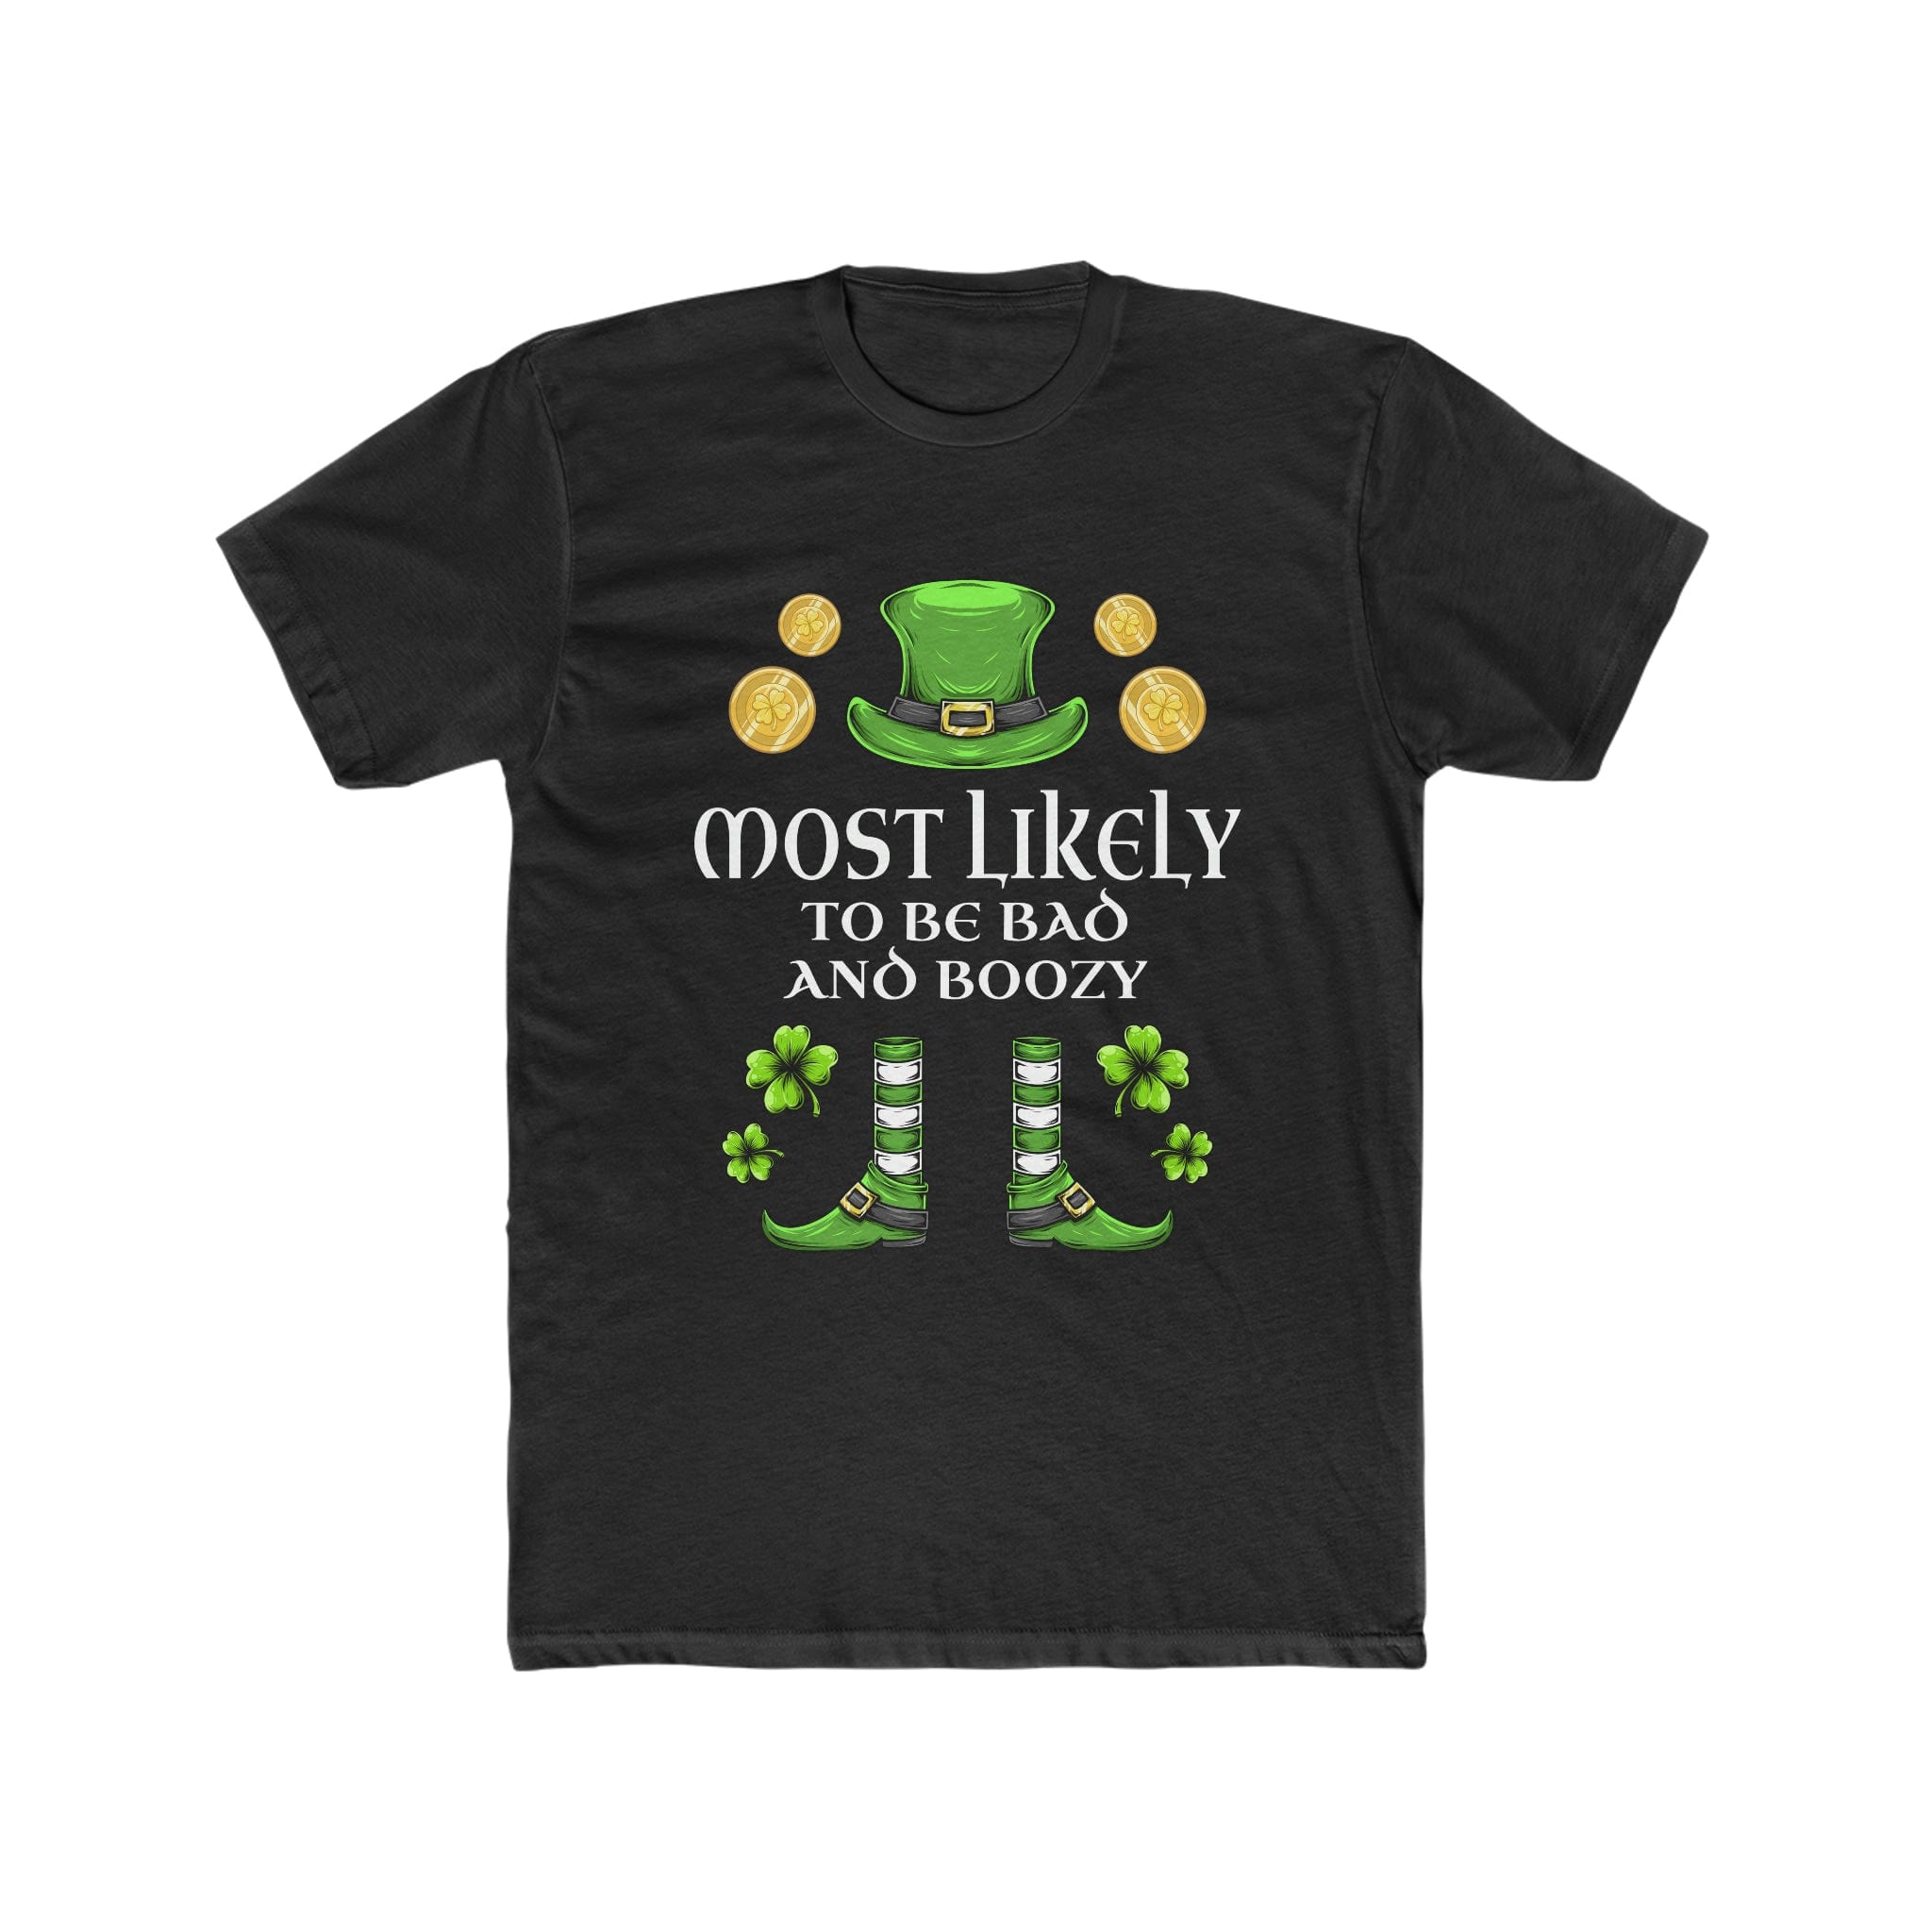 Most likely TO BE BAD AND BOOZY Premium Unisex Shirt